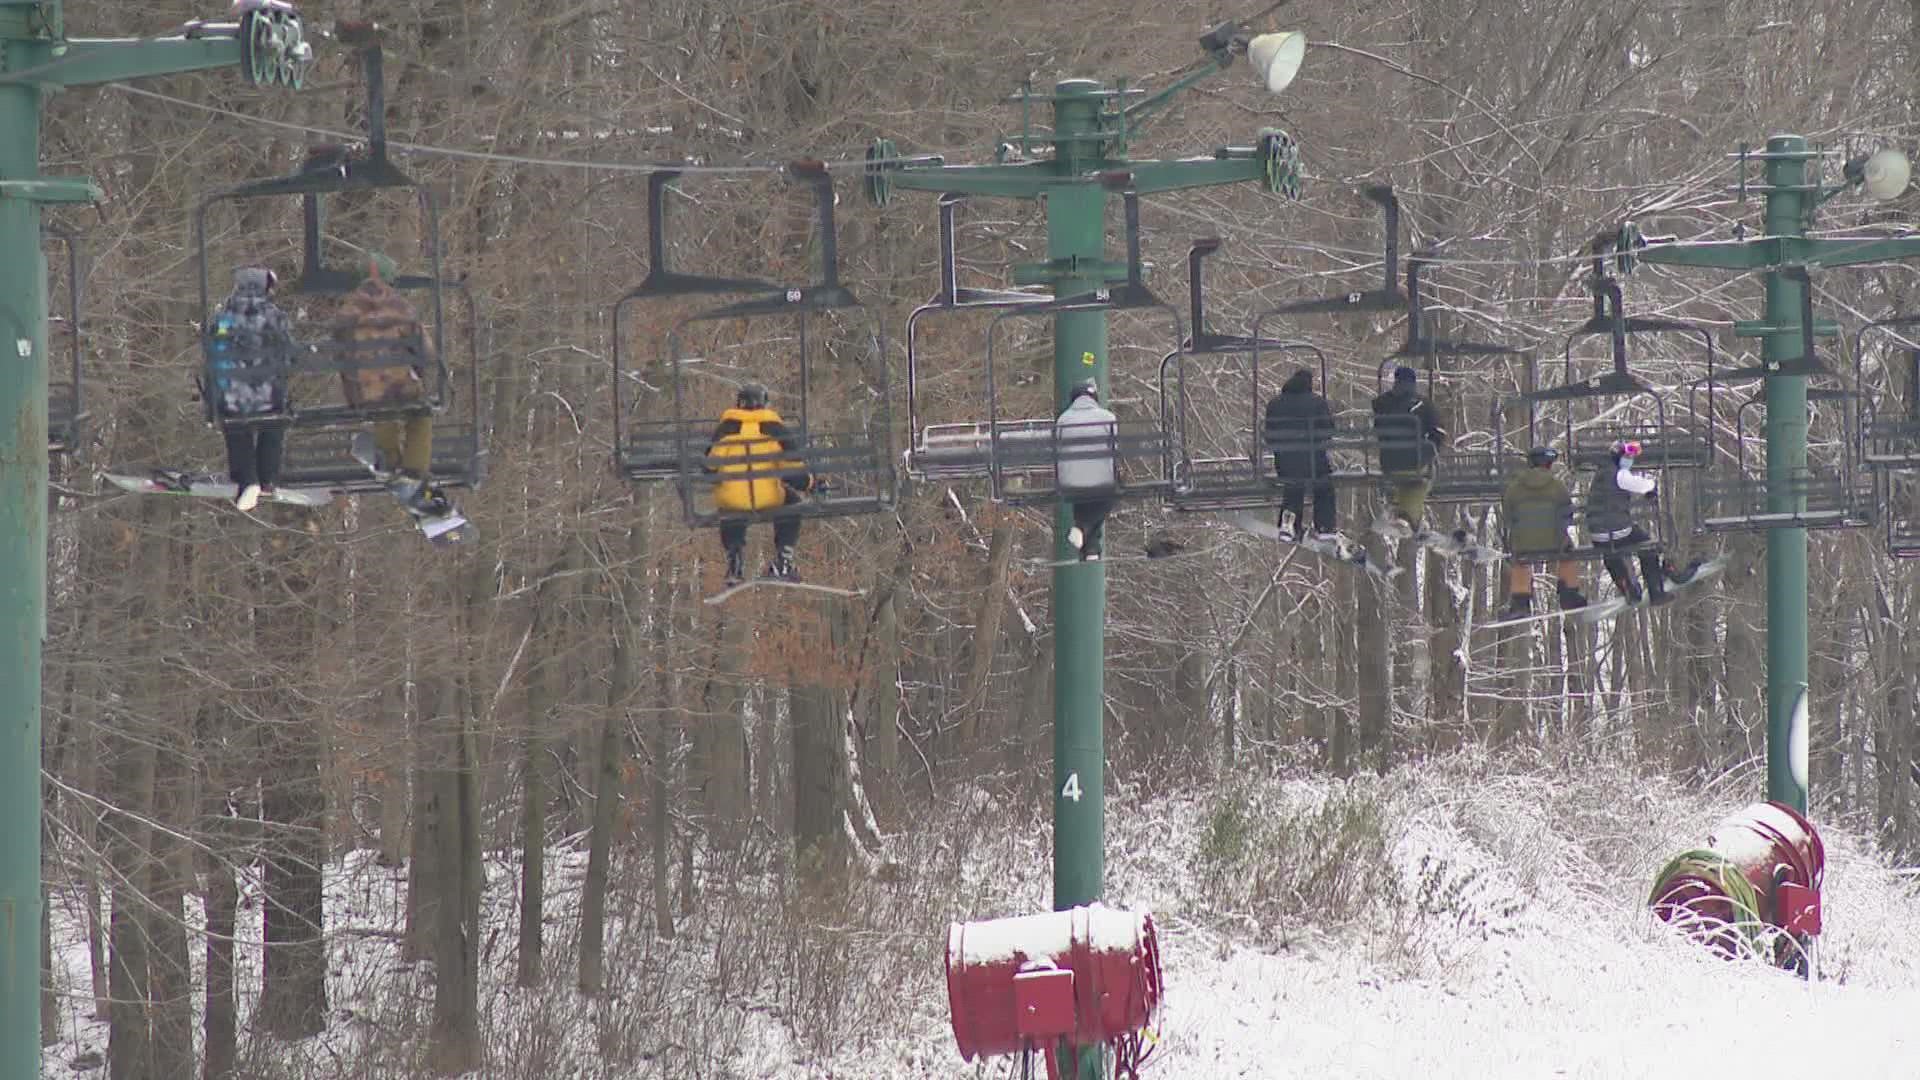 The groomers and snowmakers have been working 24-7 since Monday, so the Allegan County ski slope could welcome skiers and snowboarders early.